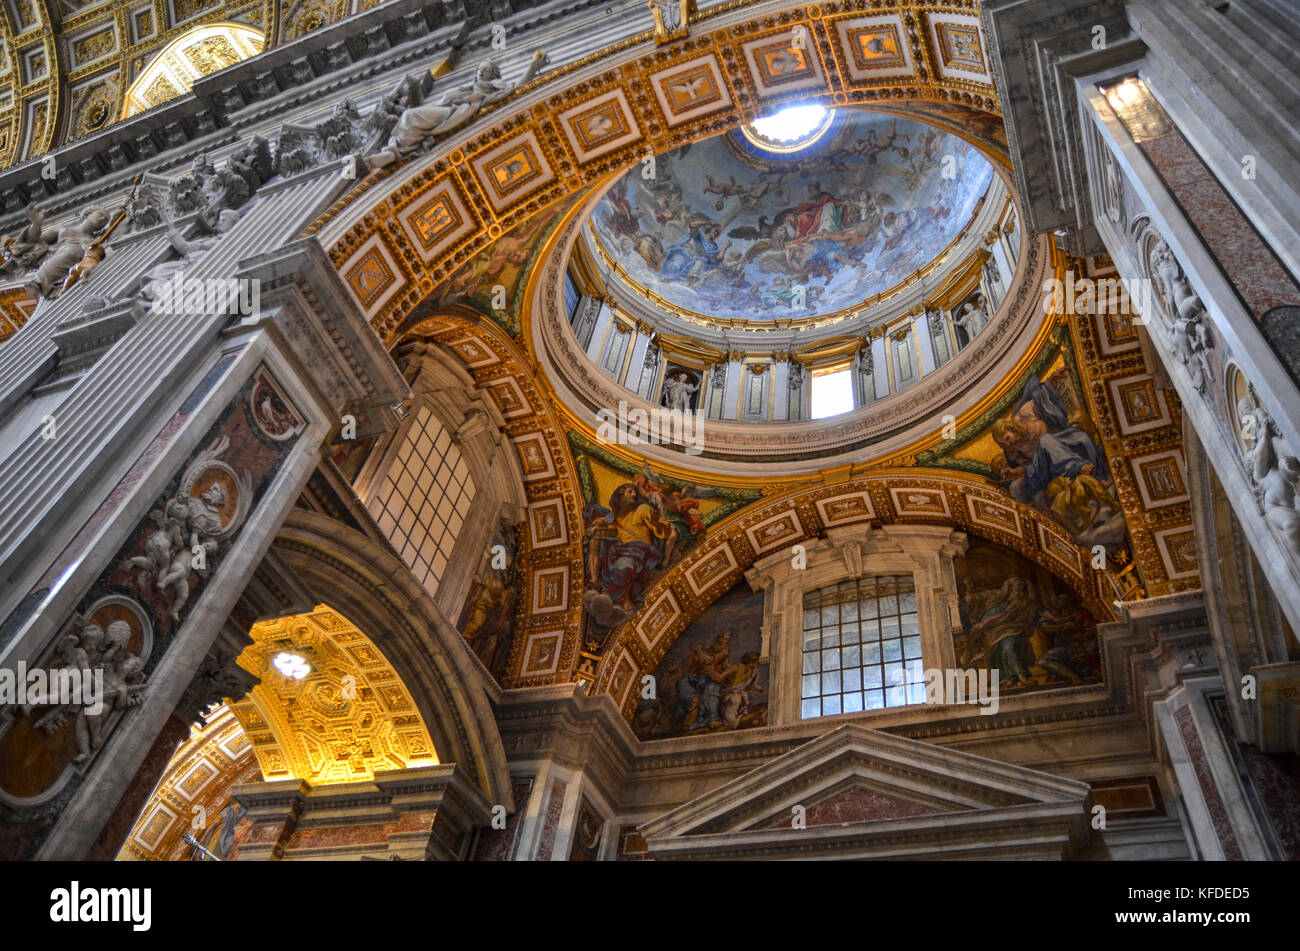 St Peter's Basilica in Rome, Italian Renaissance architecture, and UNESCO world heritage site. Interior views, of the domed ceiling with sacred artwor Stock Photo